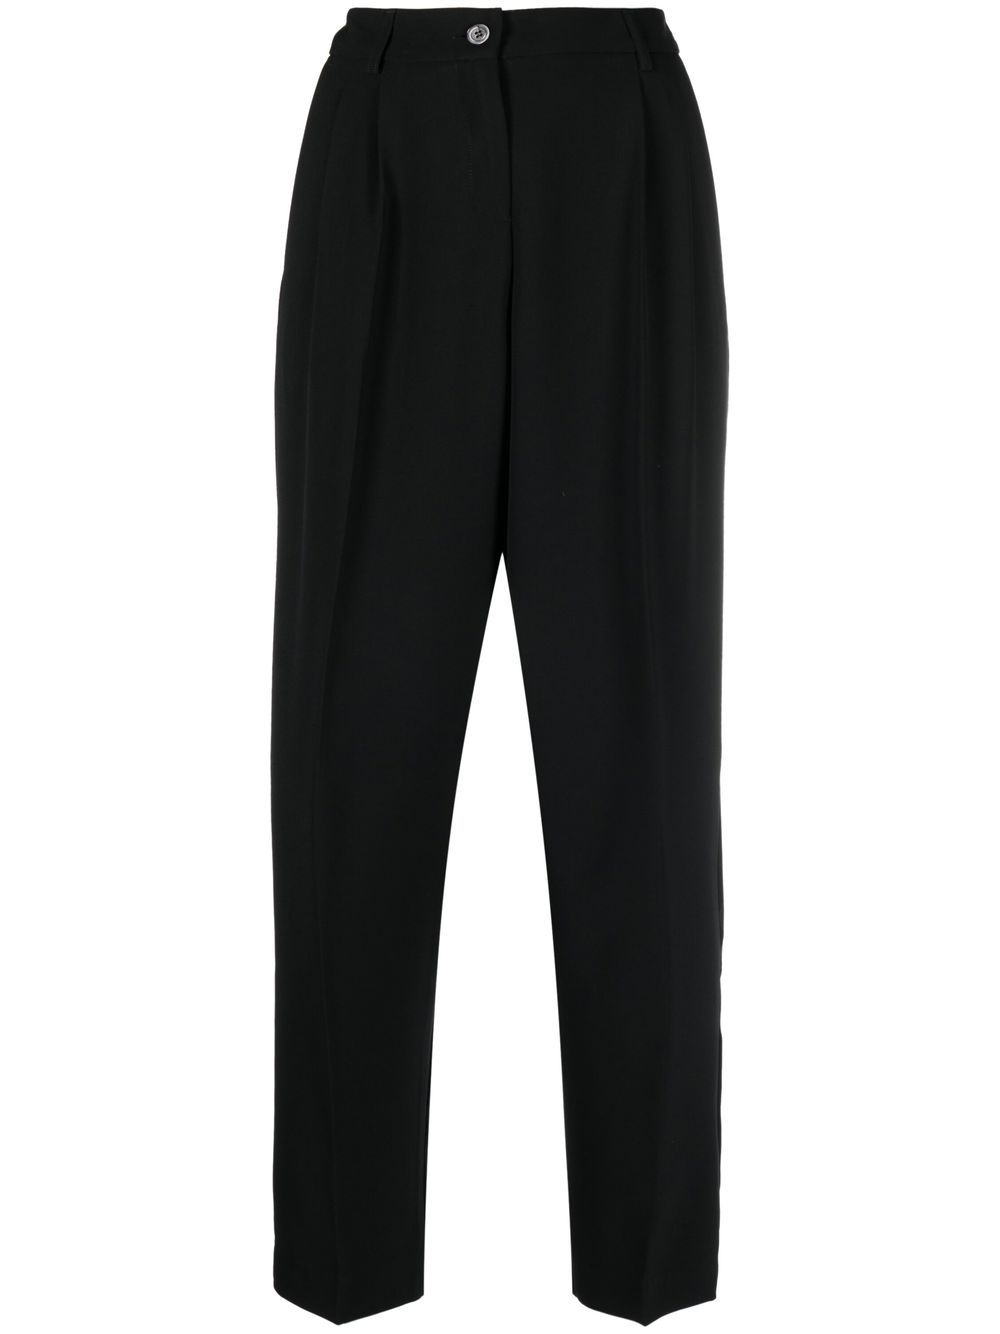 Cenere GB tapered high-waist trousers